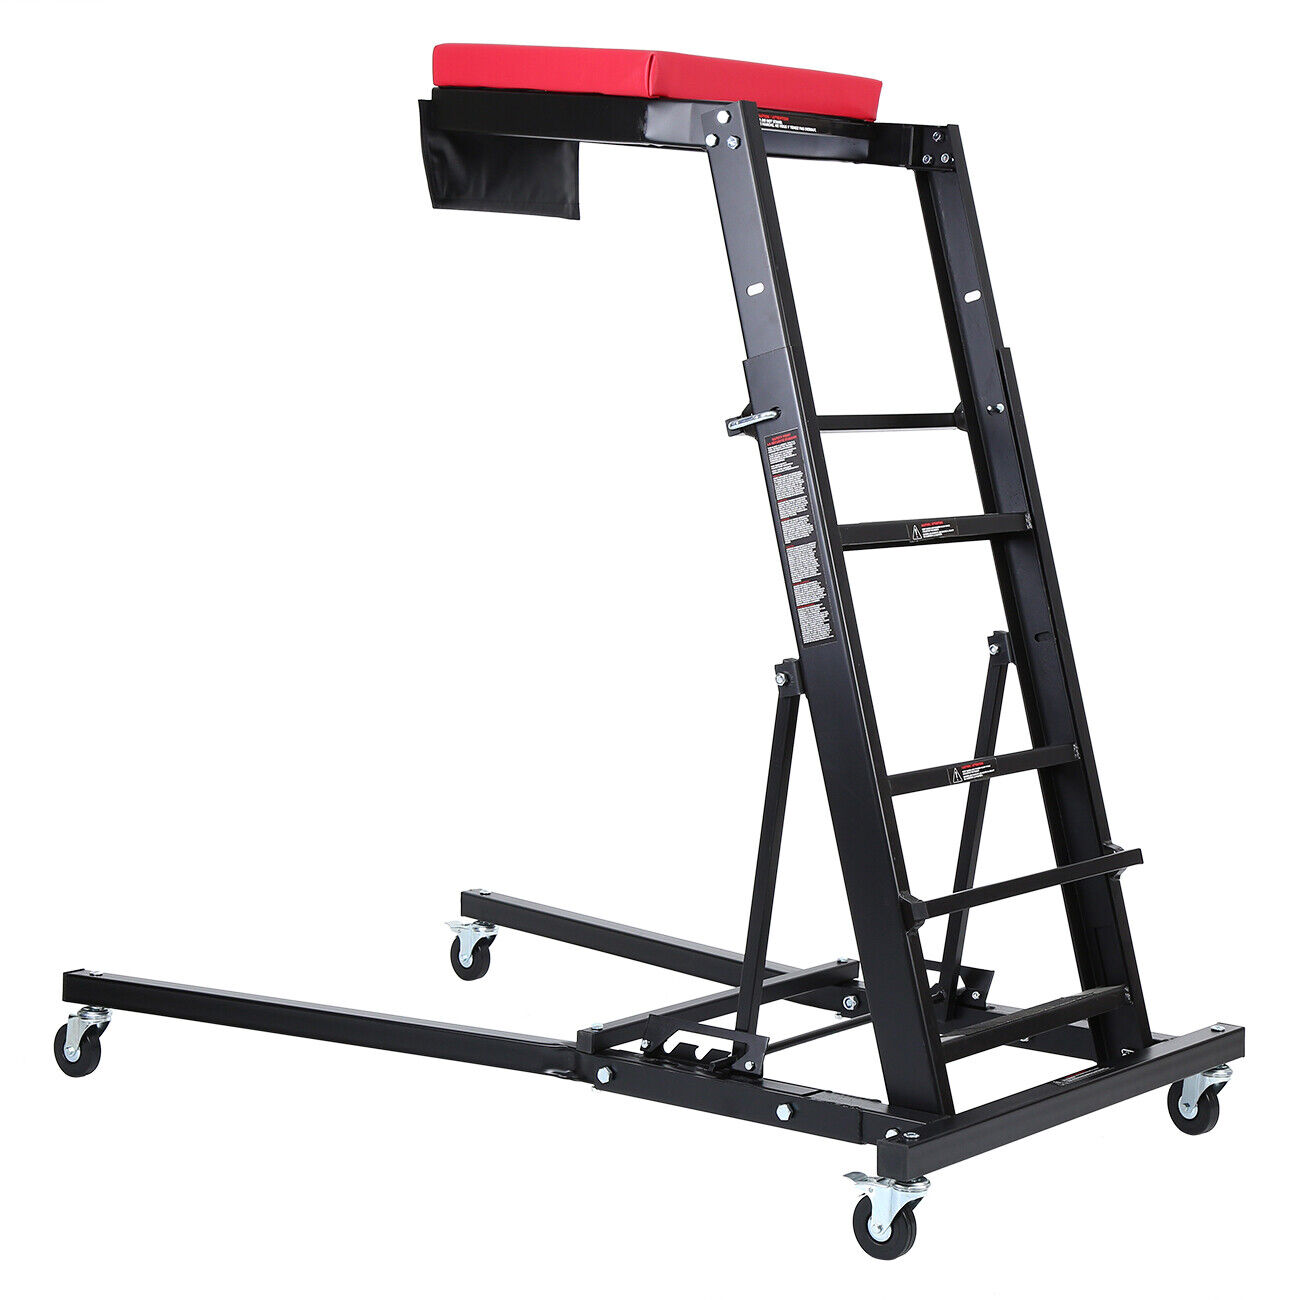 Engine Access Foldable Topside Creeper With Adjustable Height & Padded Deck